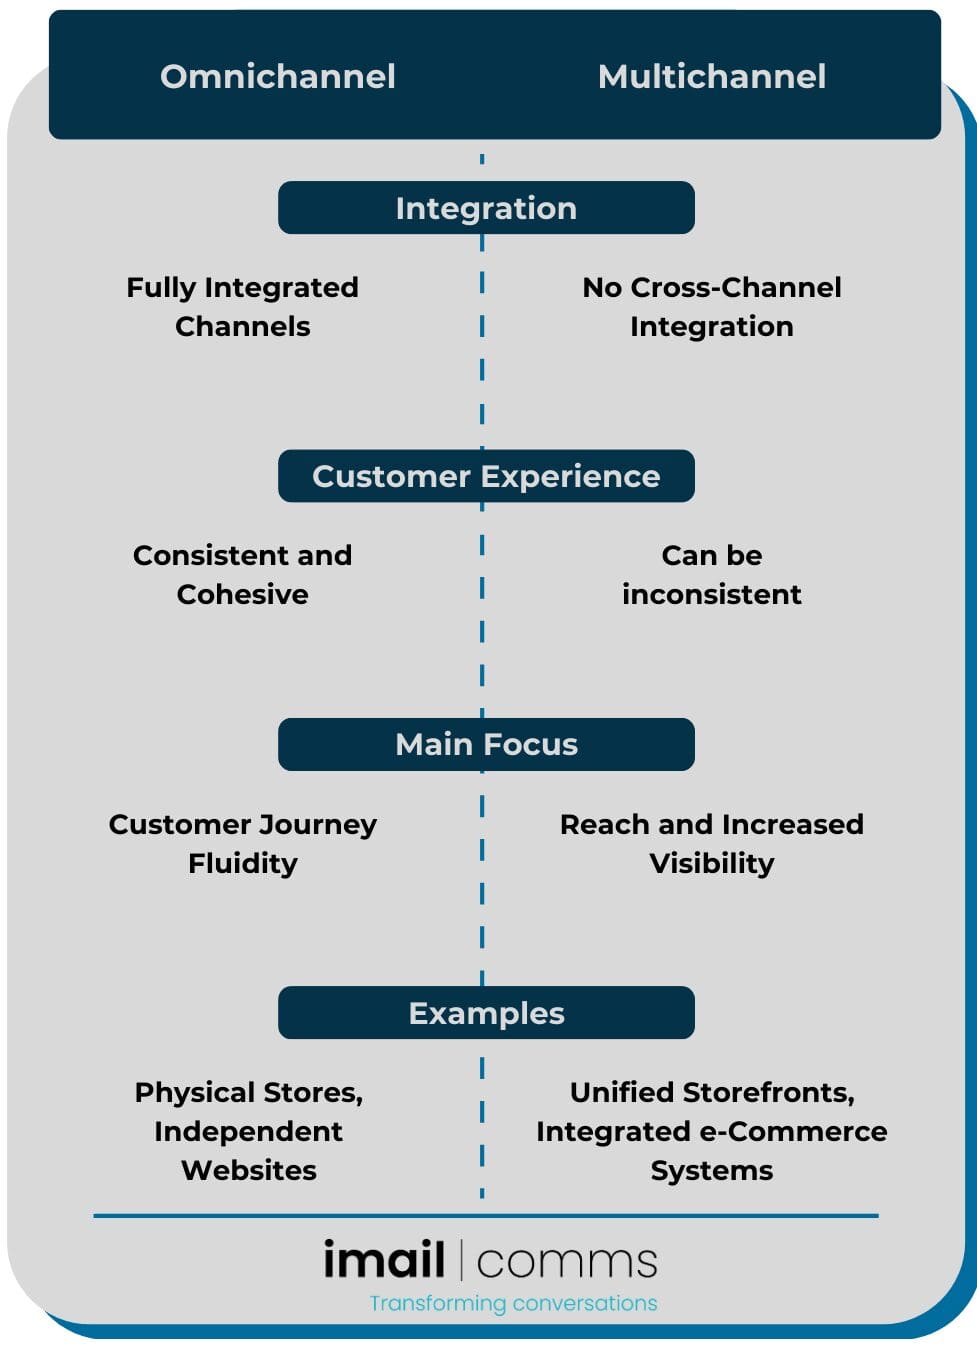 Brief comparison of omnichannel and multichannel advantages and disadvantages